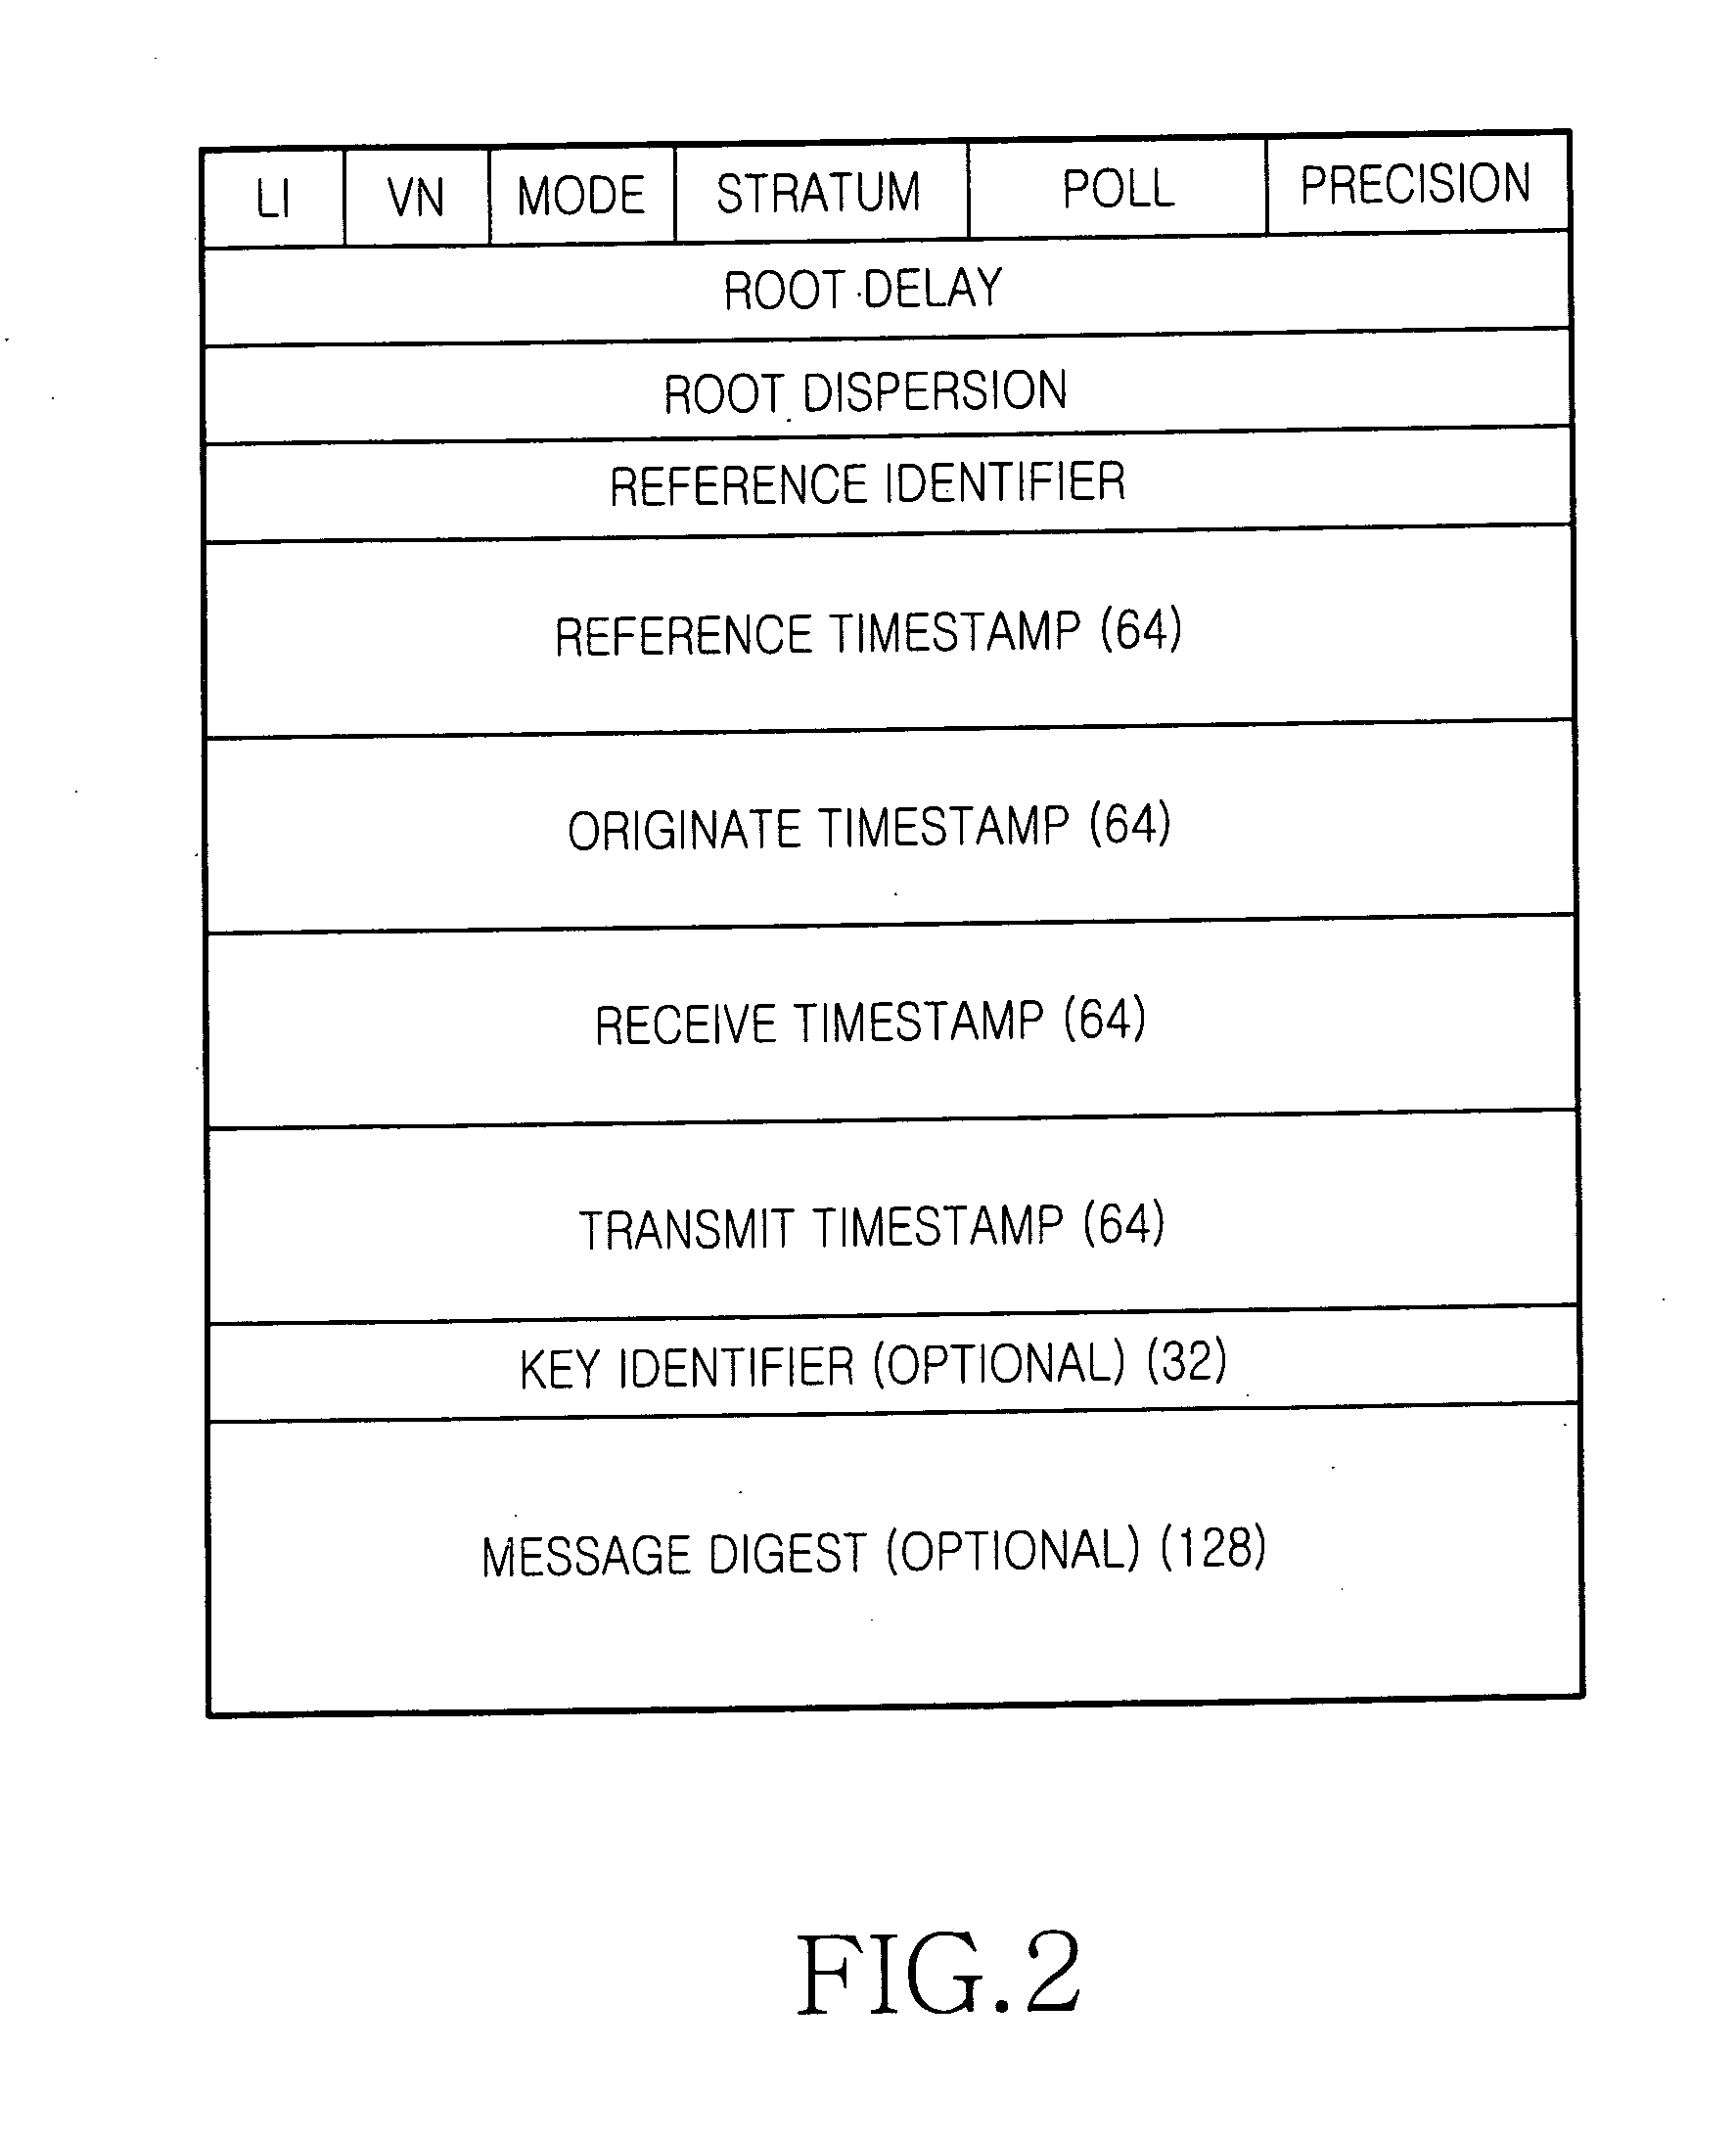 AGPS system using NTP server and method for determining the location of a terminal using a NTP server